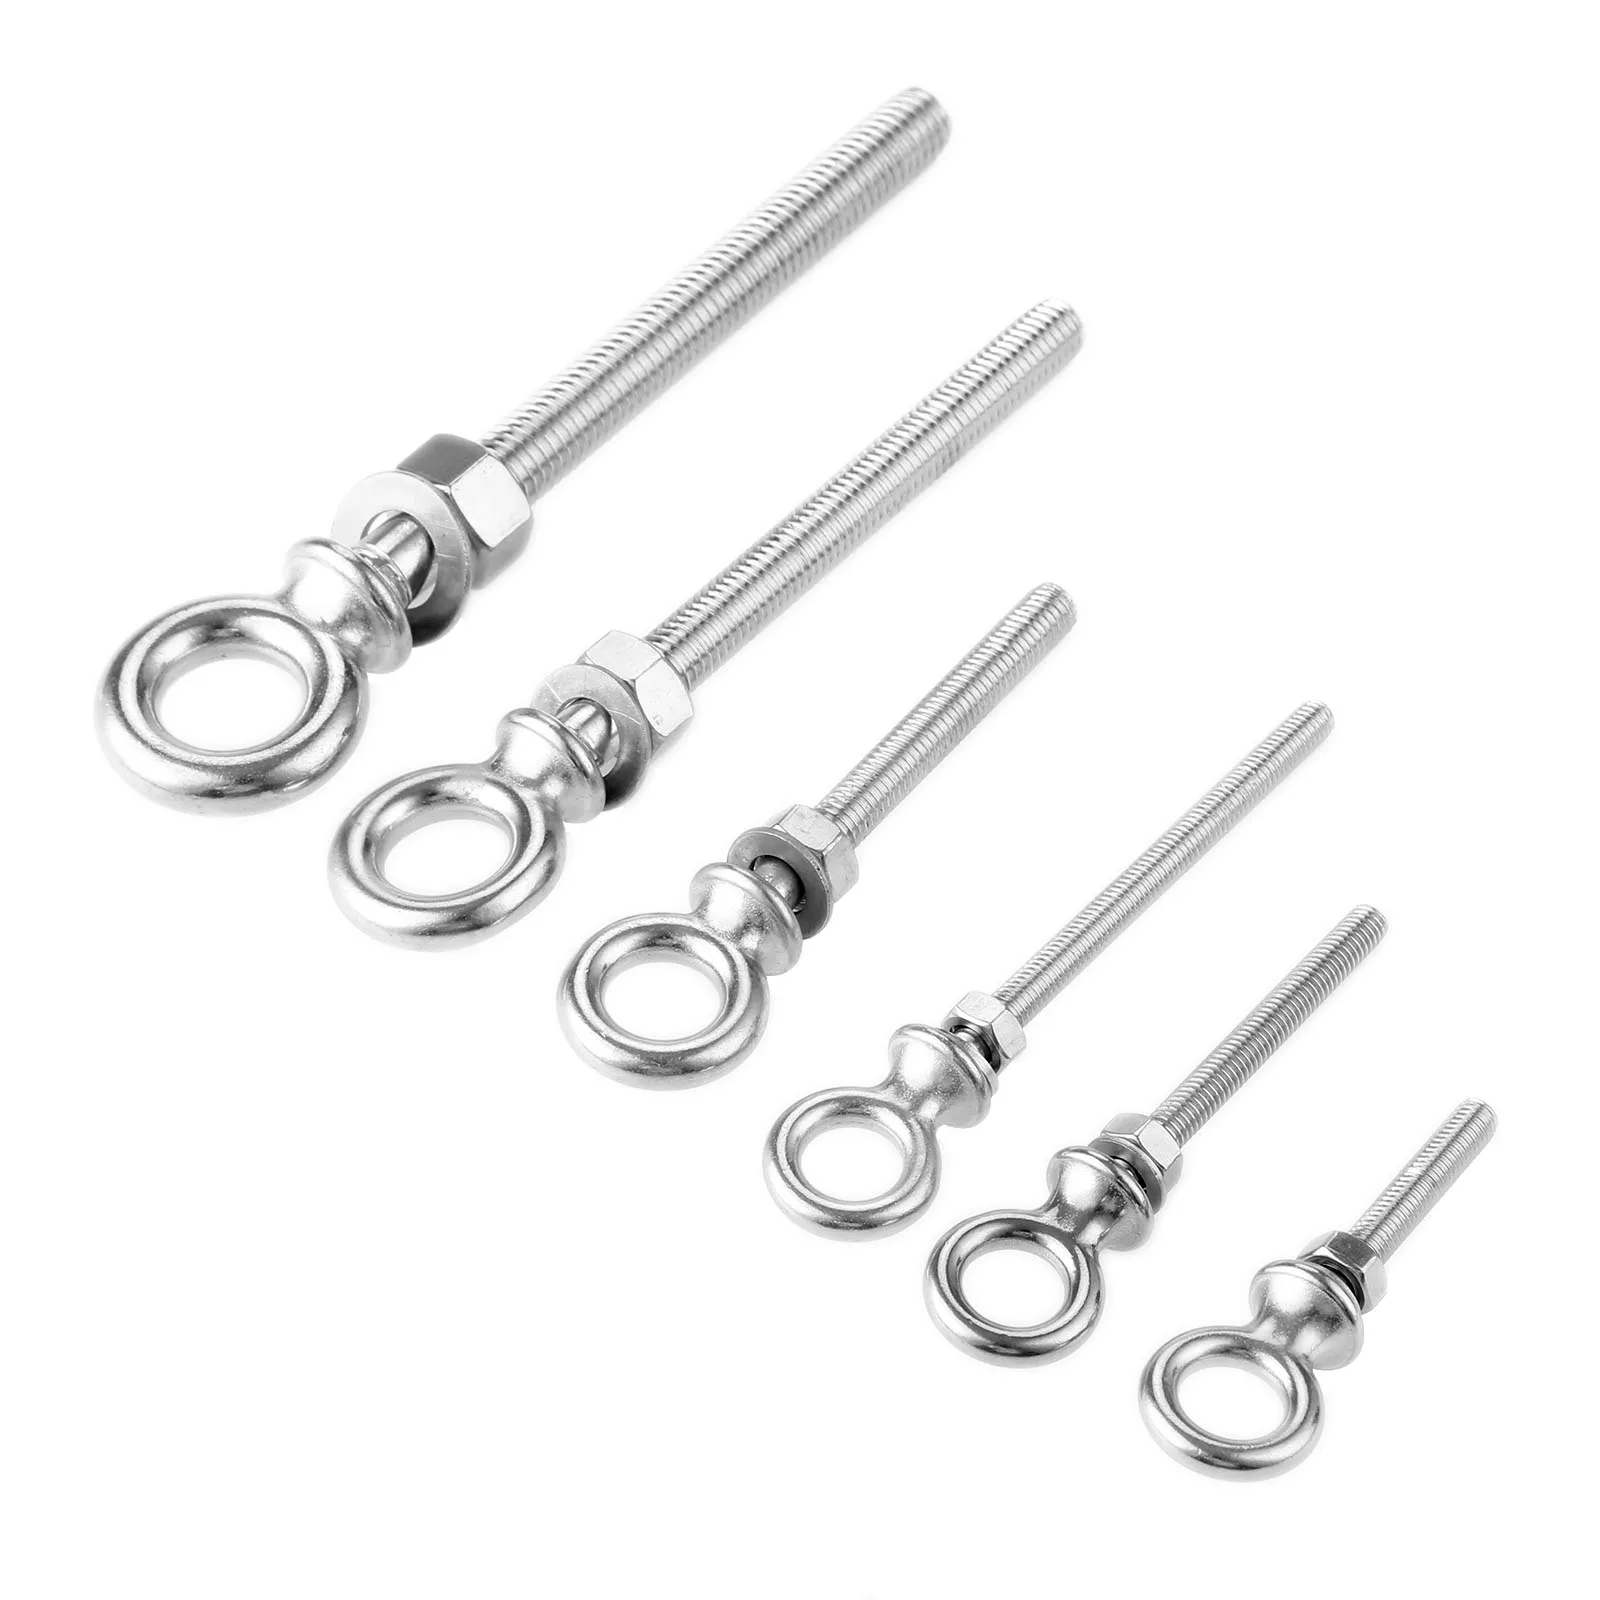 2Pcs M8 80mm Threaded Lifting Eye Bolt Ring Tie Down Stainless Steel 